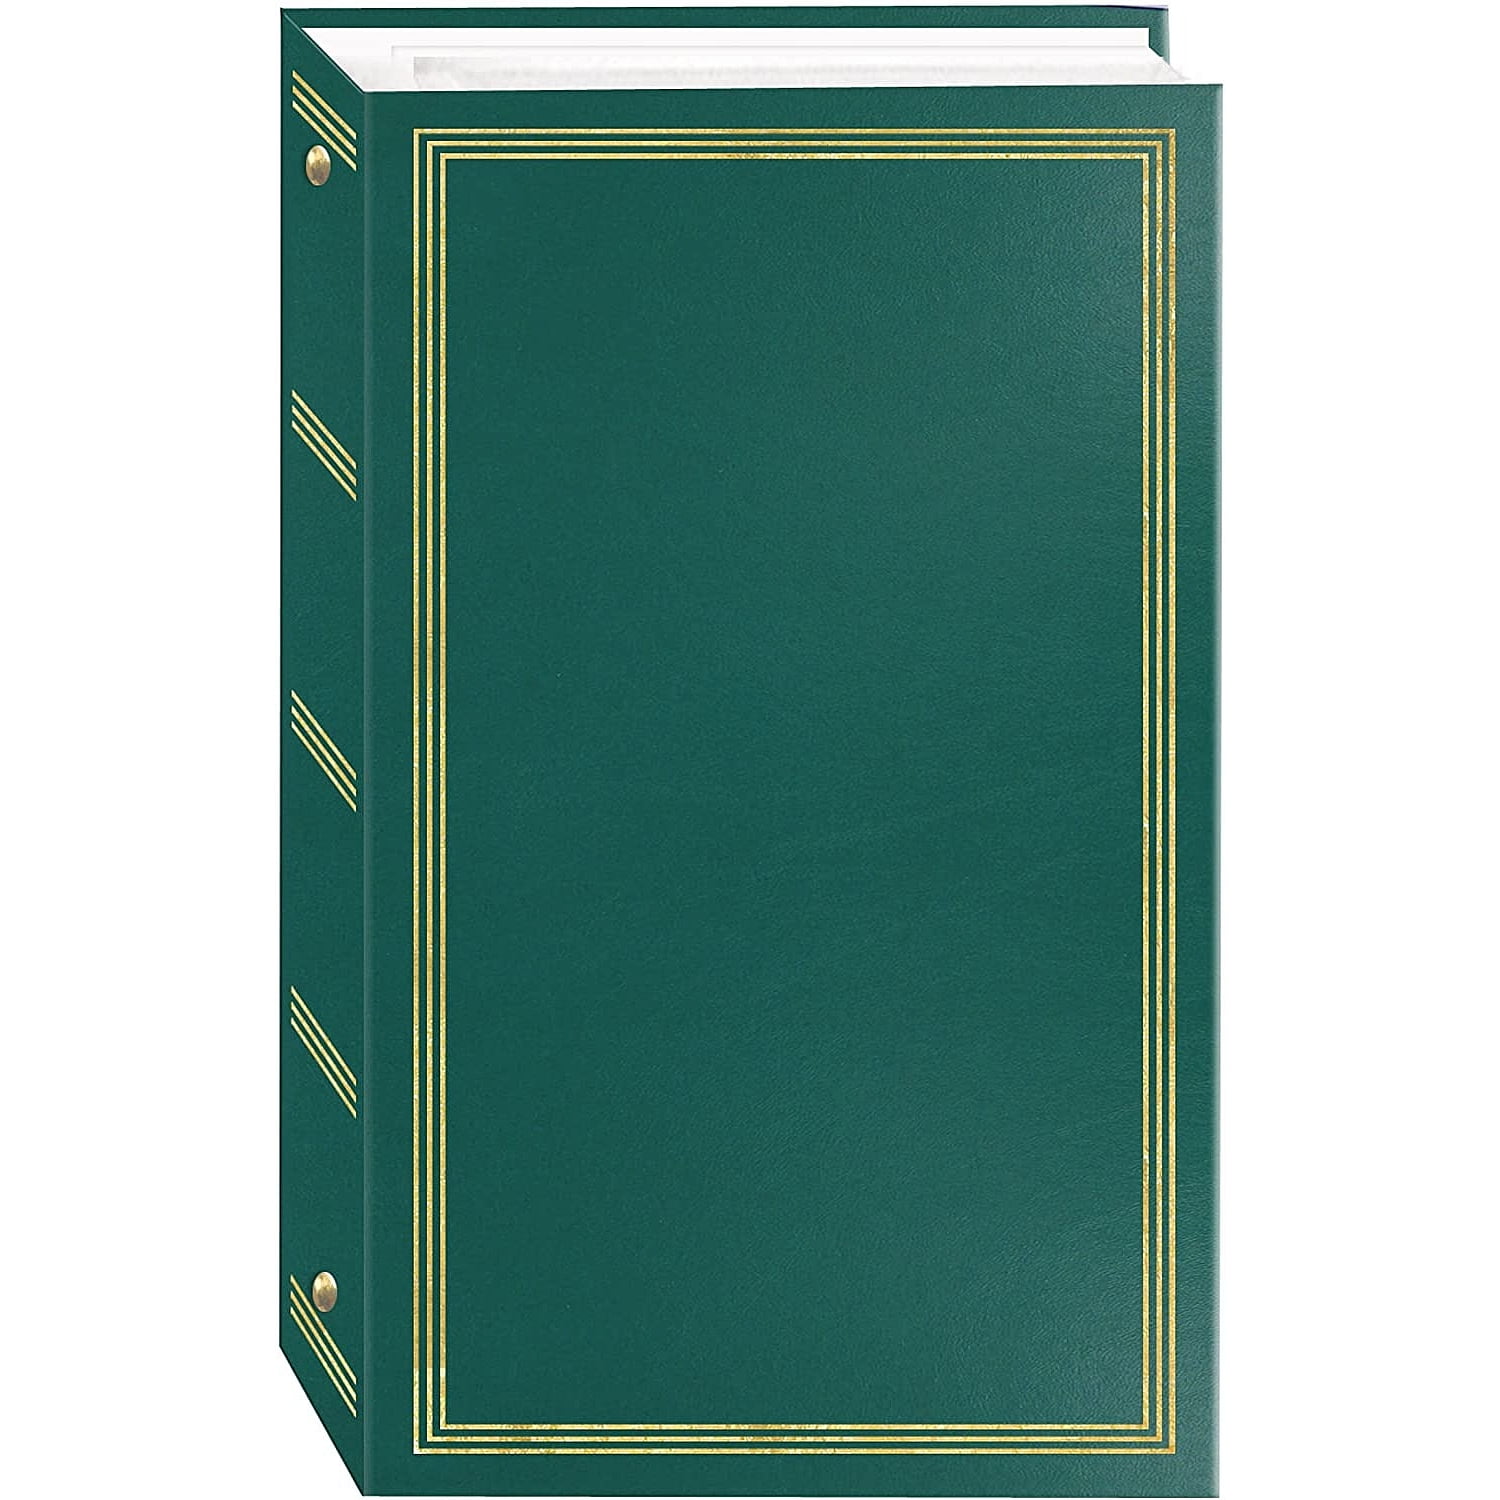 TEAL TR100 Self Adhesive Magnetic 3-Ring Photo Album - Picture